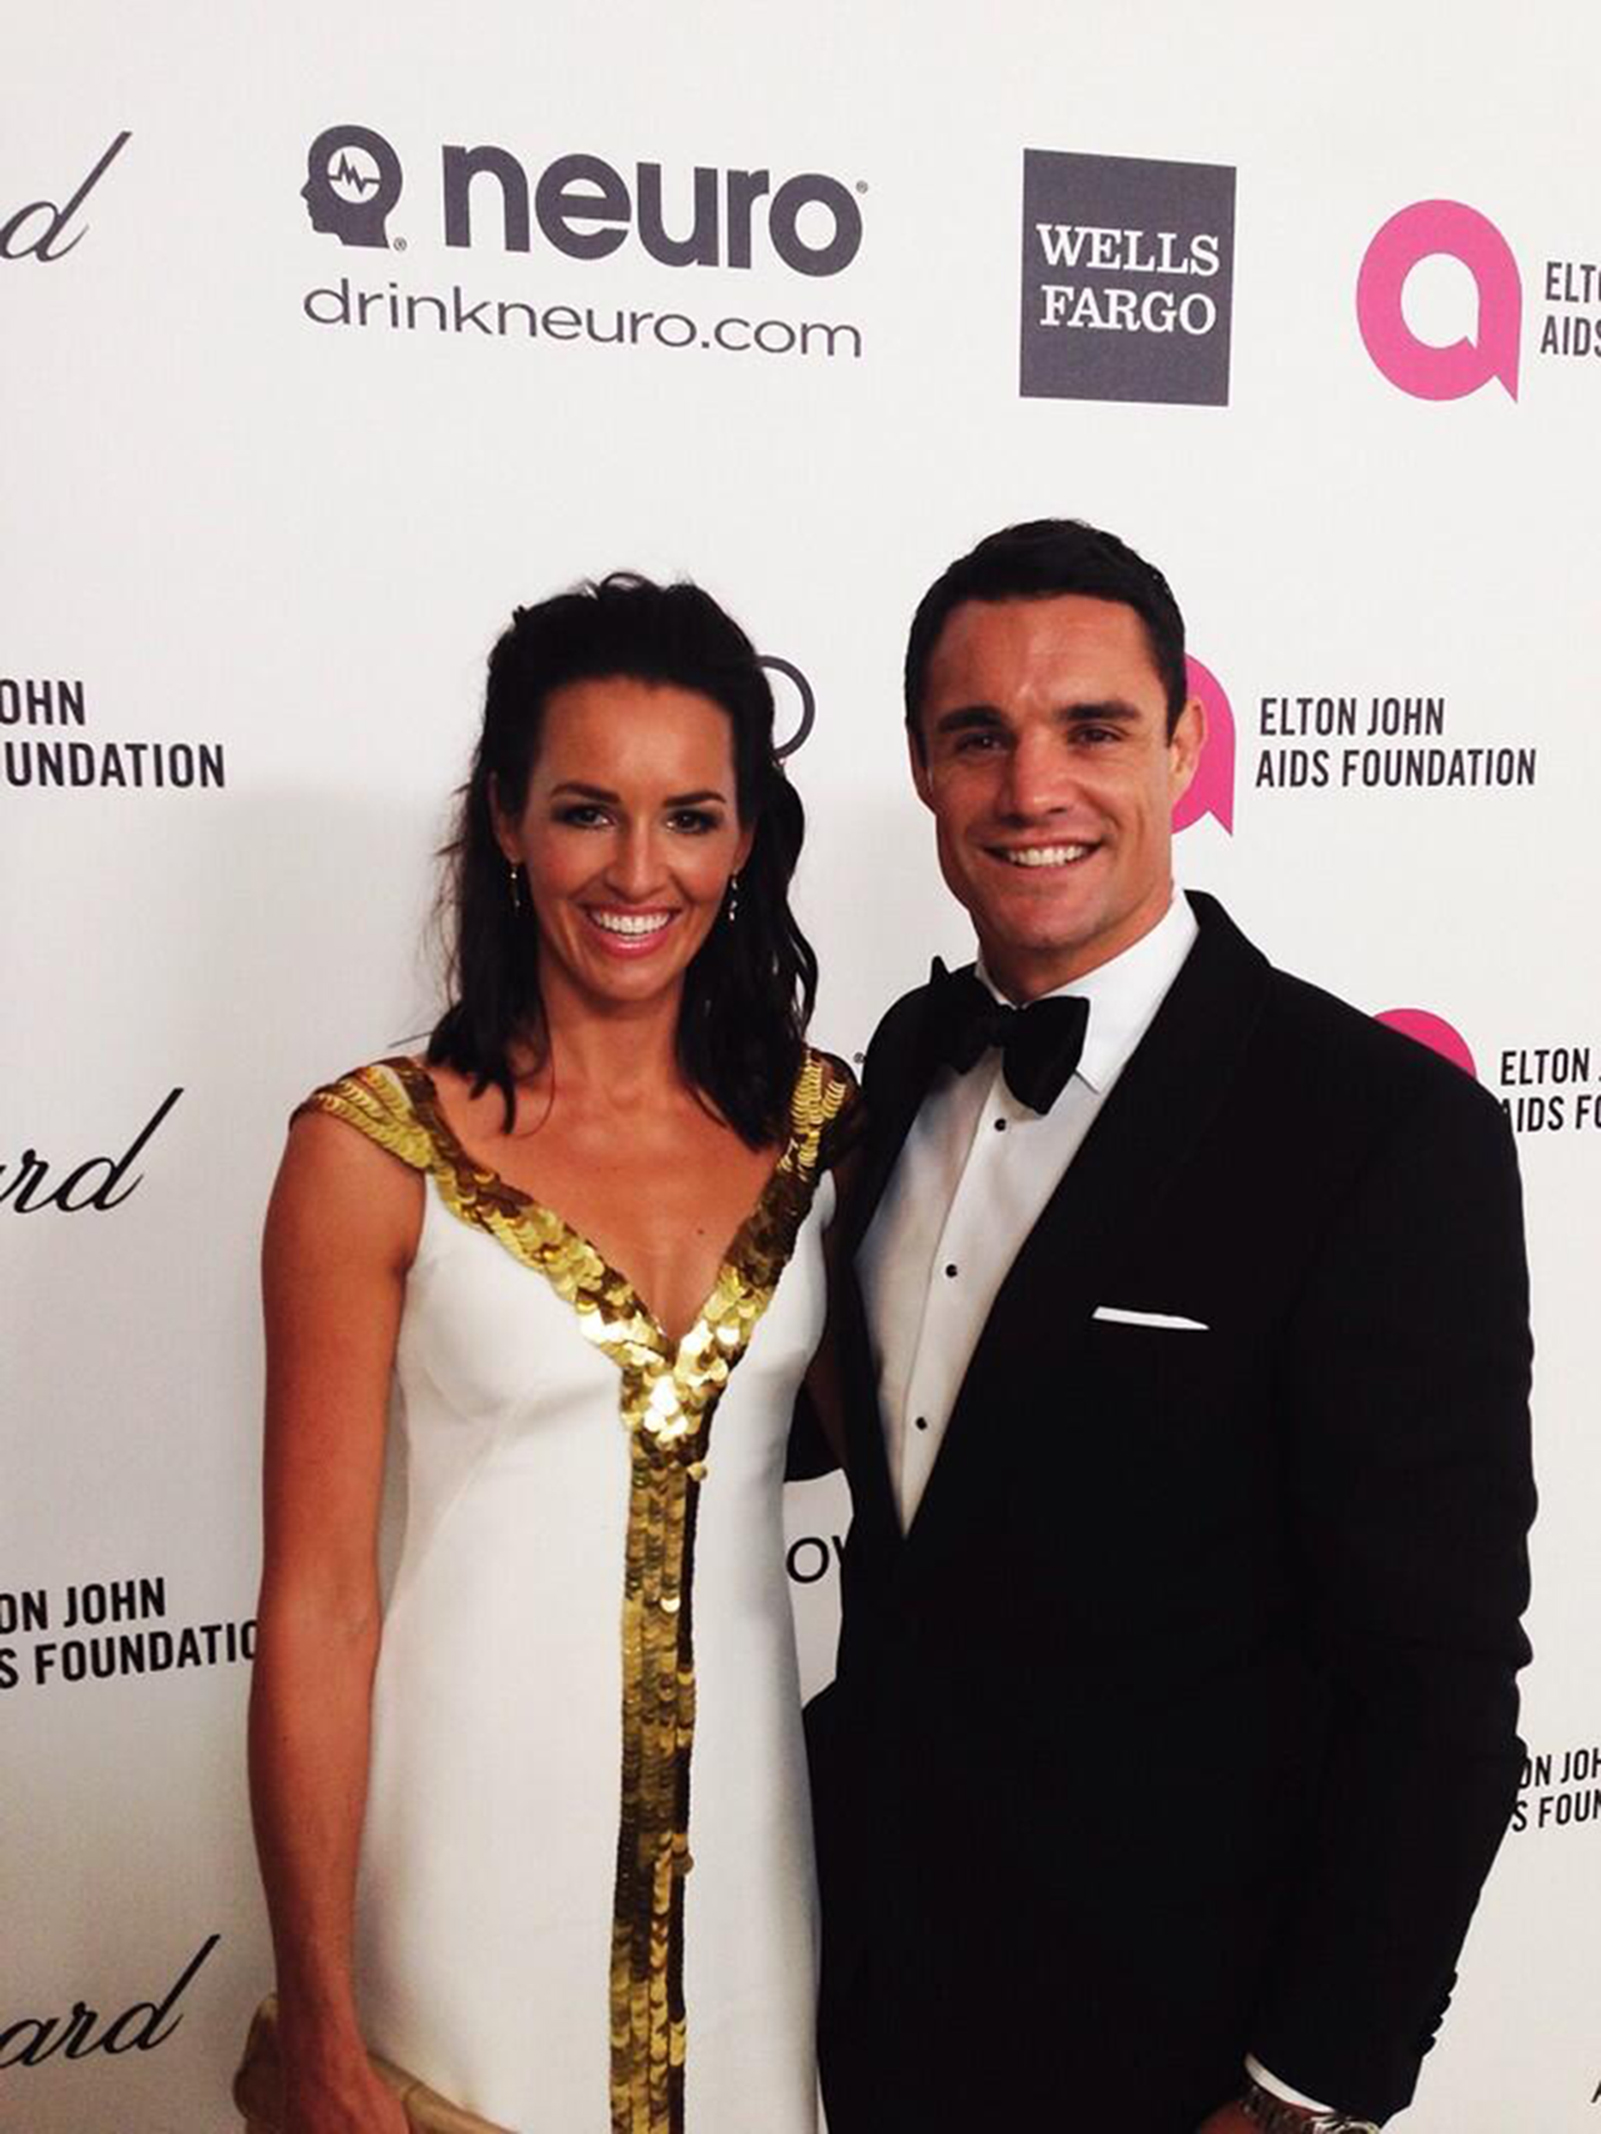 The new life of Dan Carter, his wife's sacrifice and an infamous